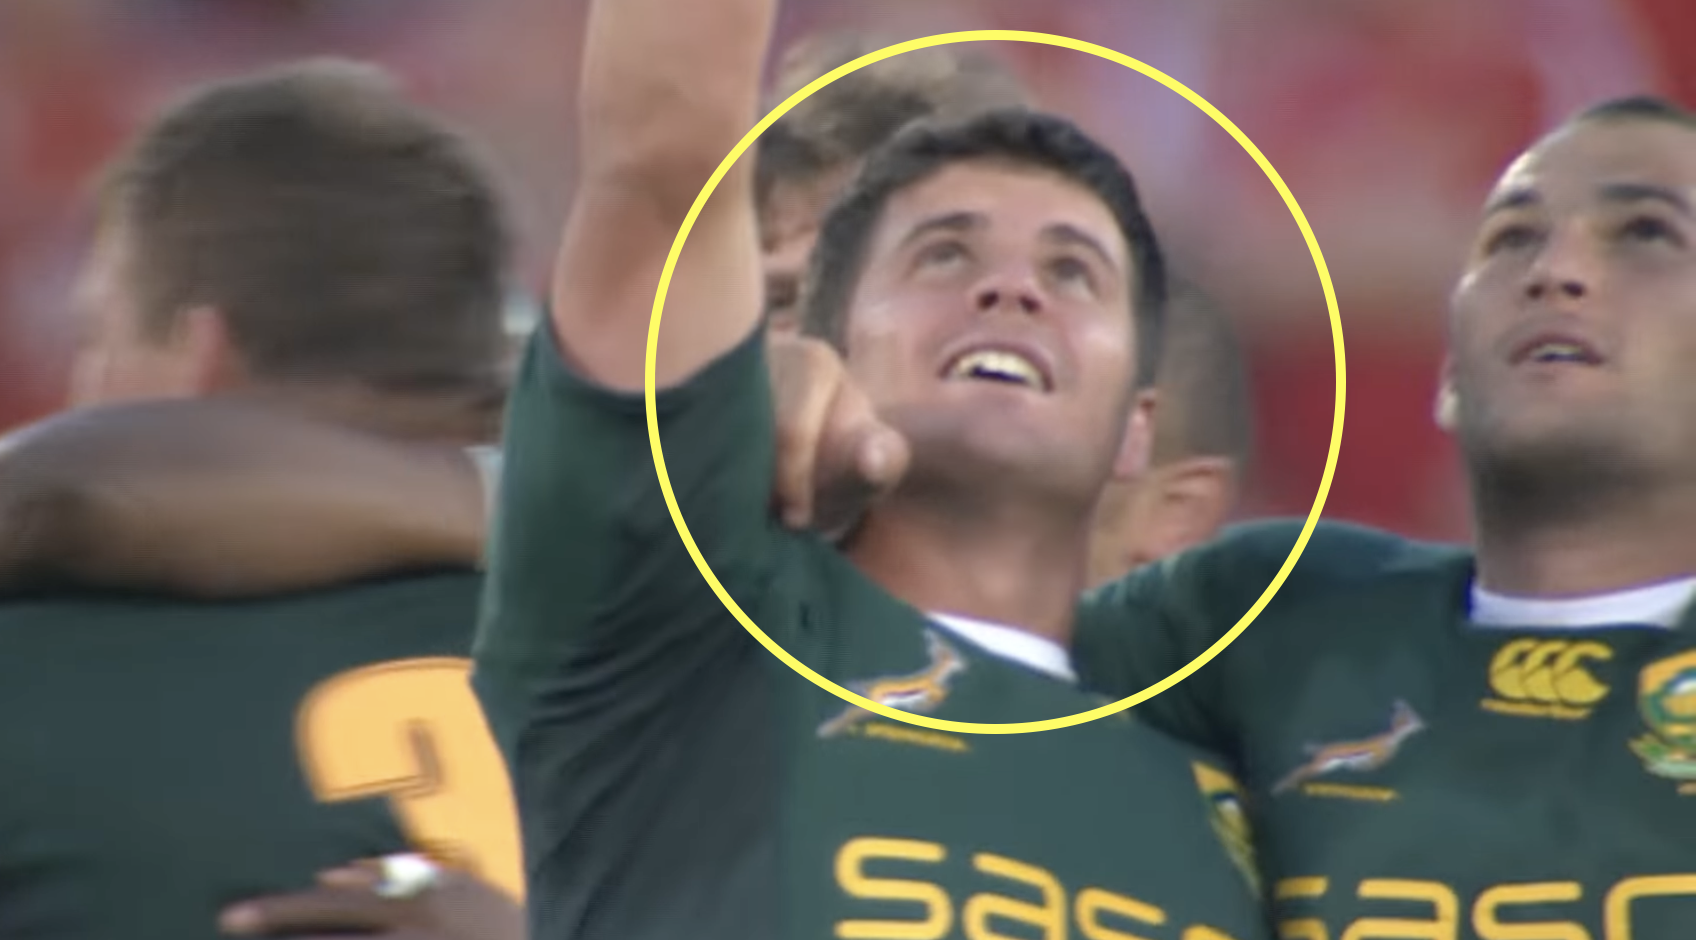 The story that shows Morne Steyn is a certified badass